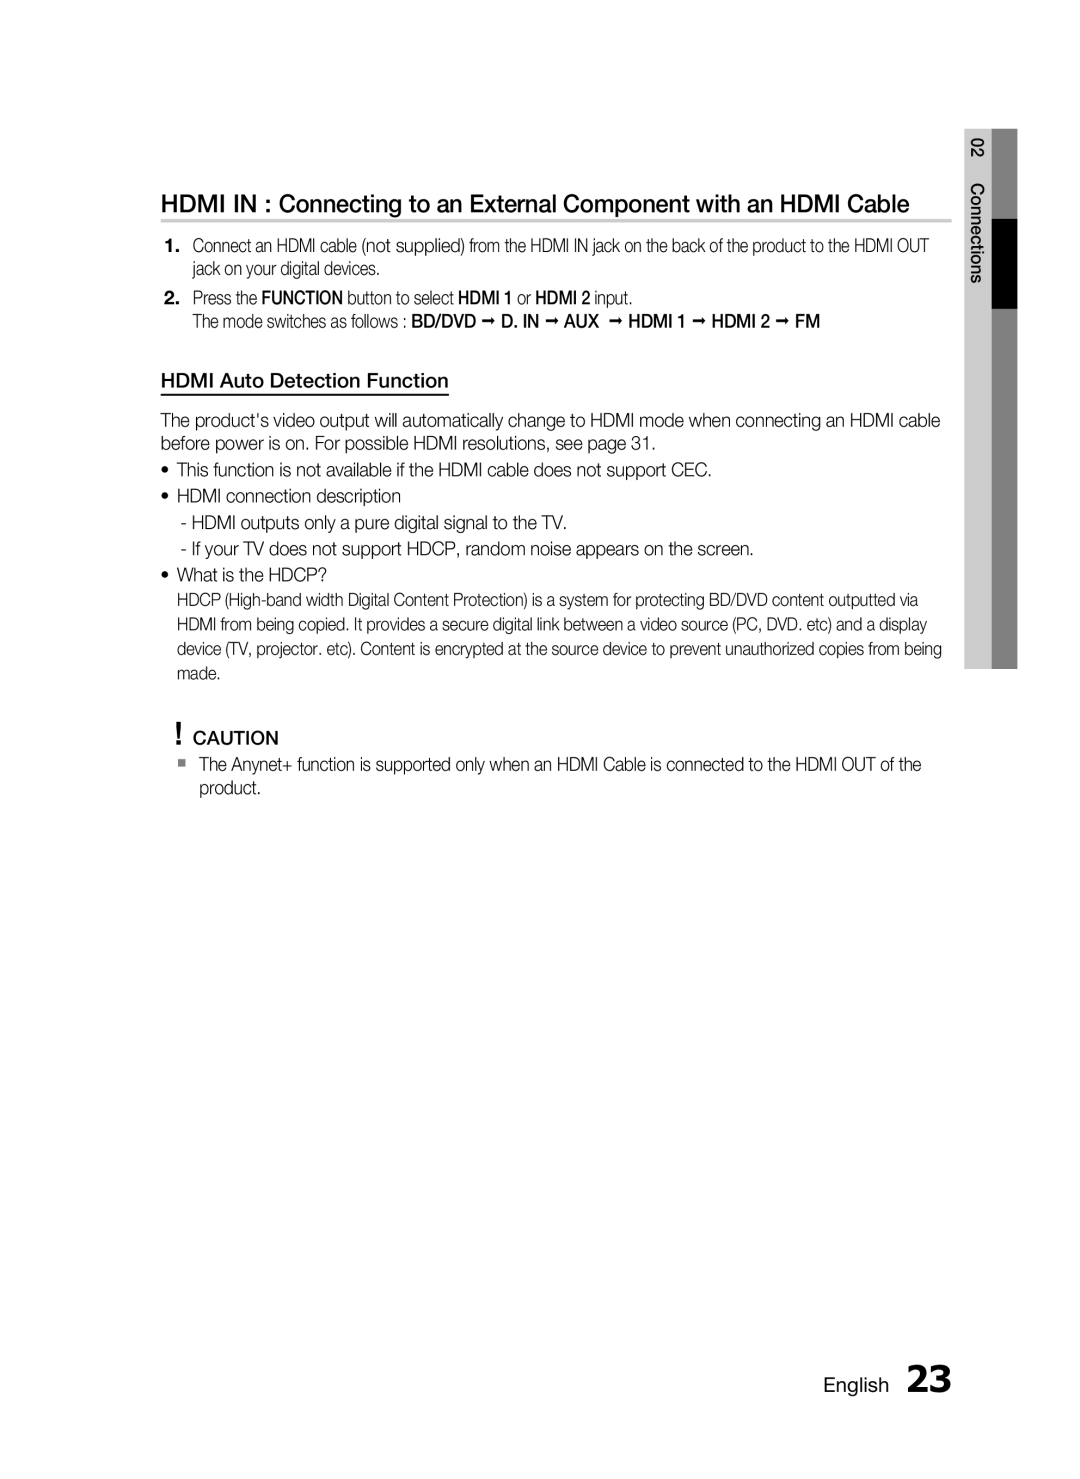 Samsung HT-C5550 user manual Hdmi Auto Detection Function 